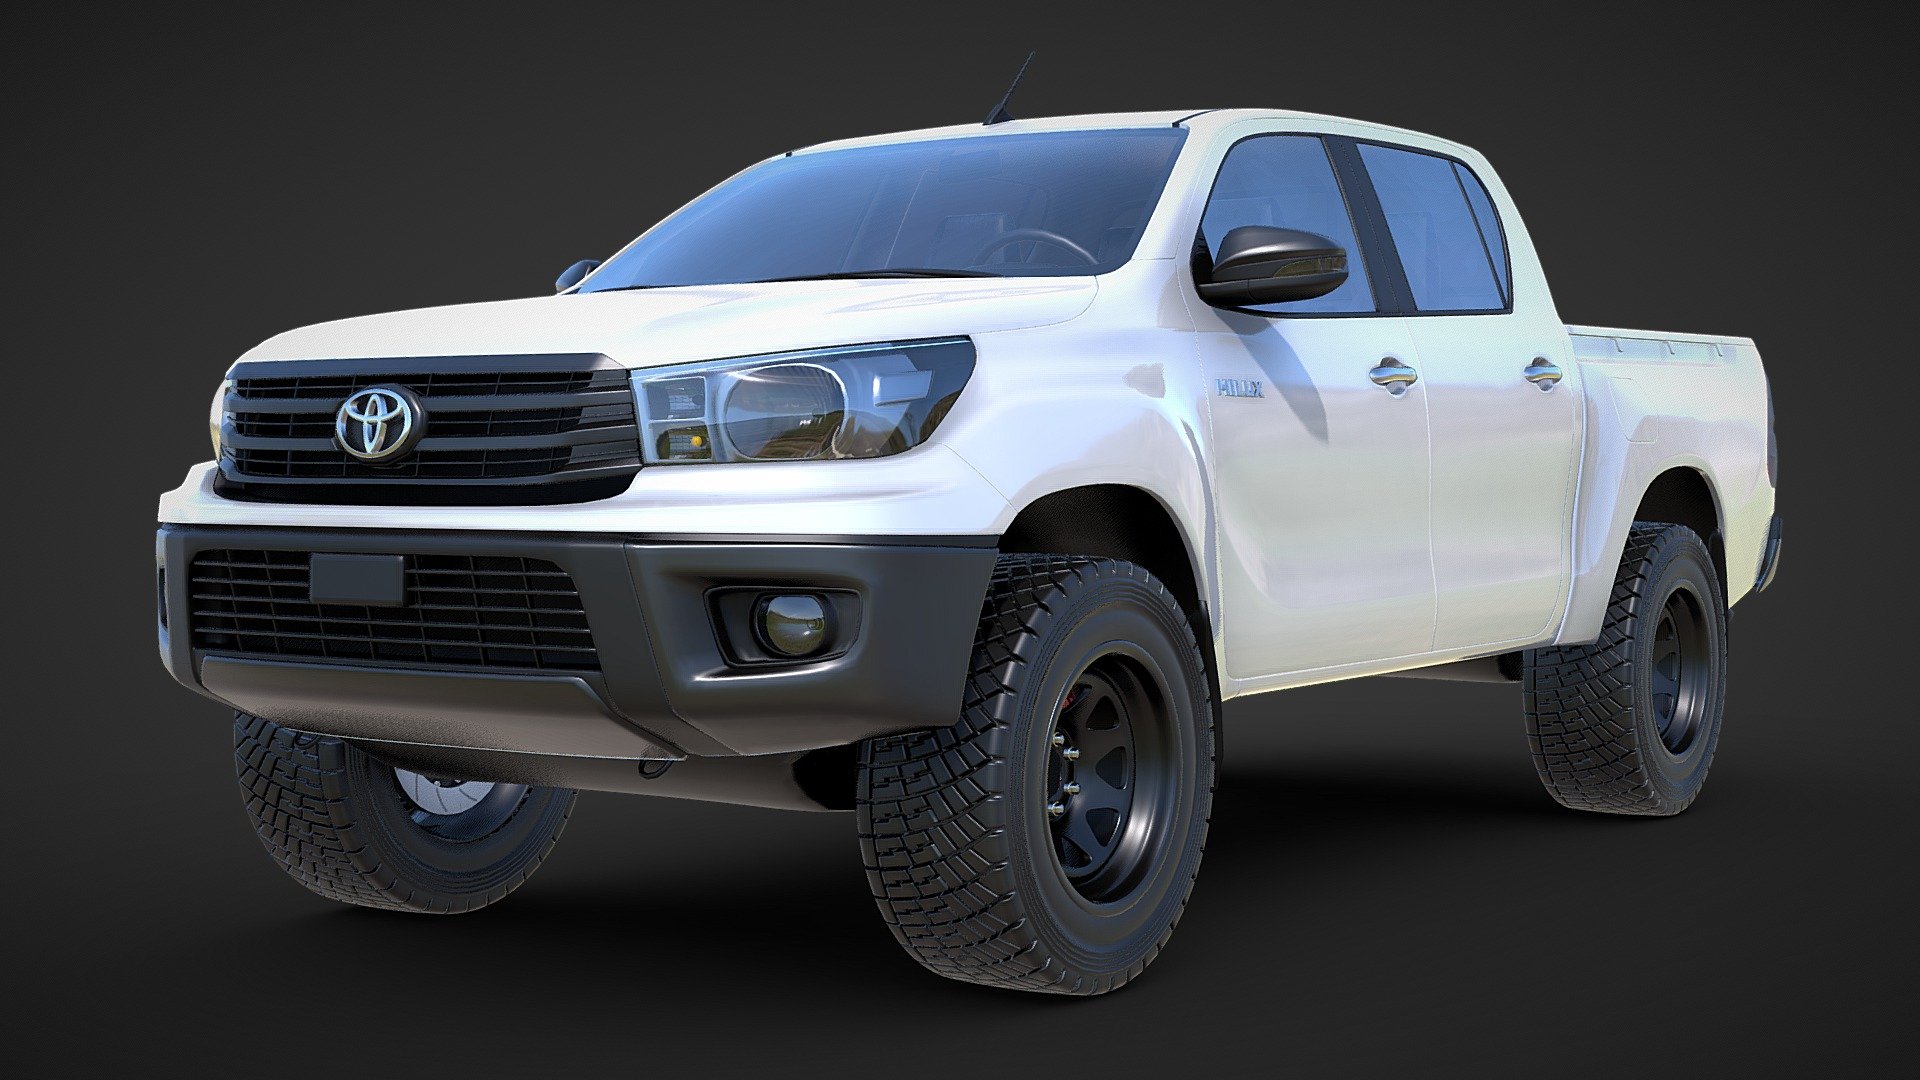 Toyota N80 Hilux Stock Variation

✔️ FREE Colour Change Upon Request ✔️ FREE HD or SD Texture Resolution Upon Request ✔️ FREE Low Poly Remesh Upon Request - Toyota N80 Hilux Stock - Buy Royalty Free 3D model by Pitstop 3D (@Pitsop3D) 3d model